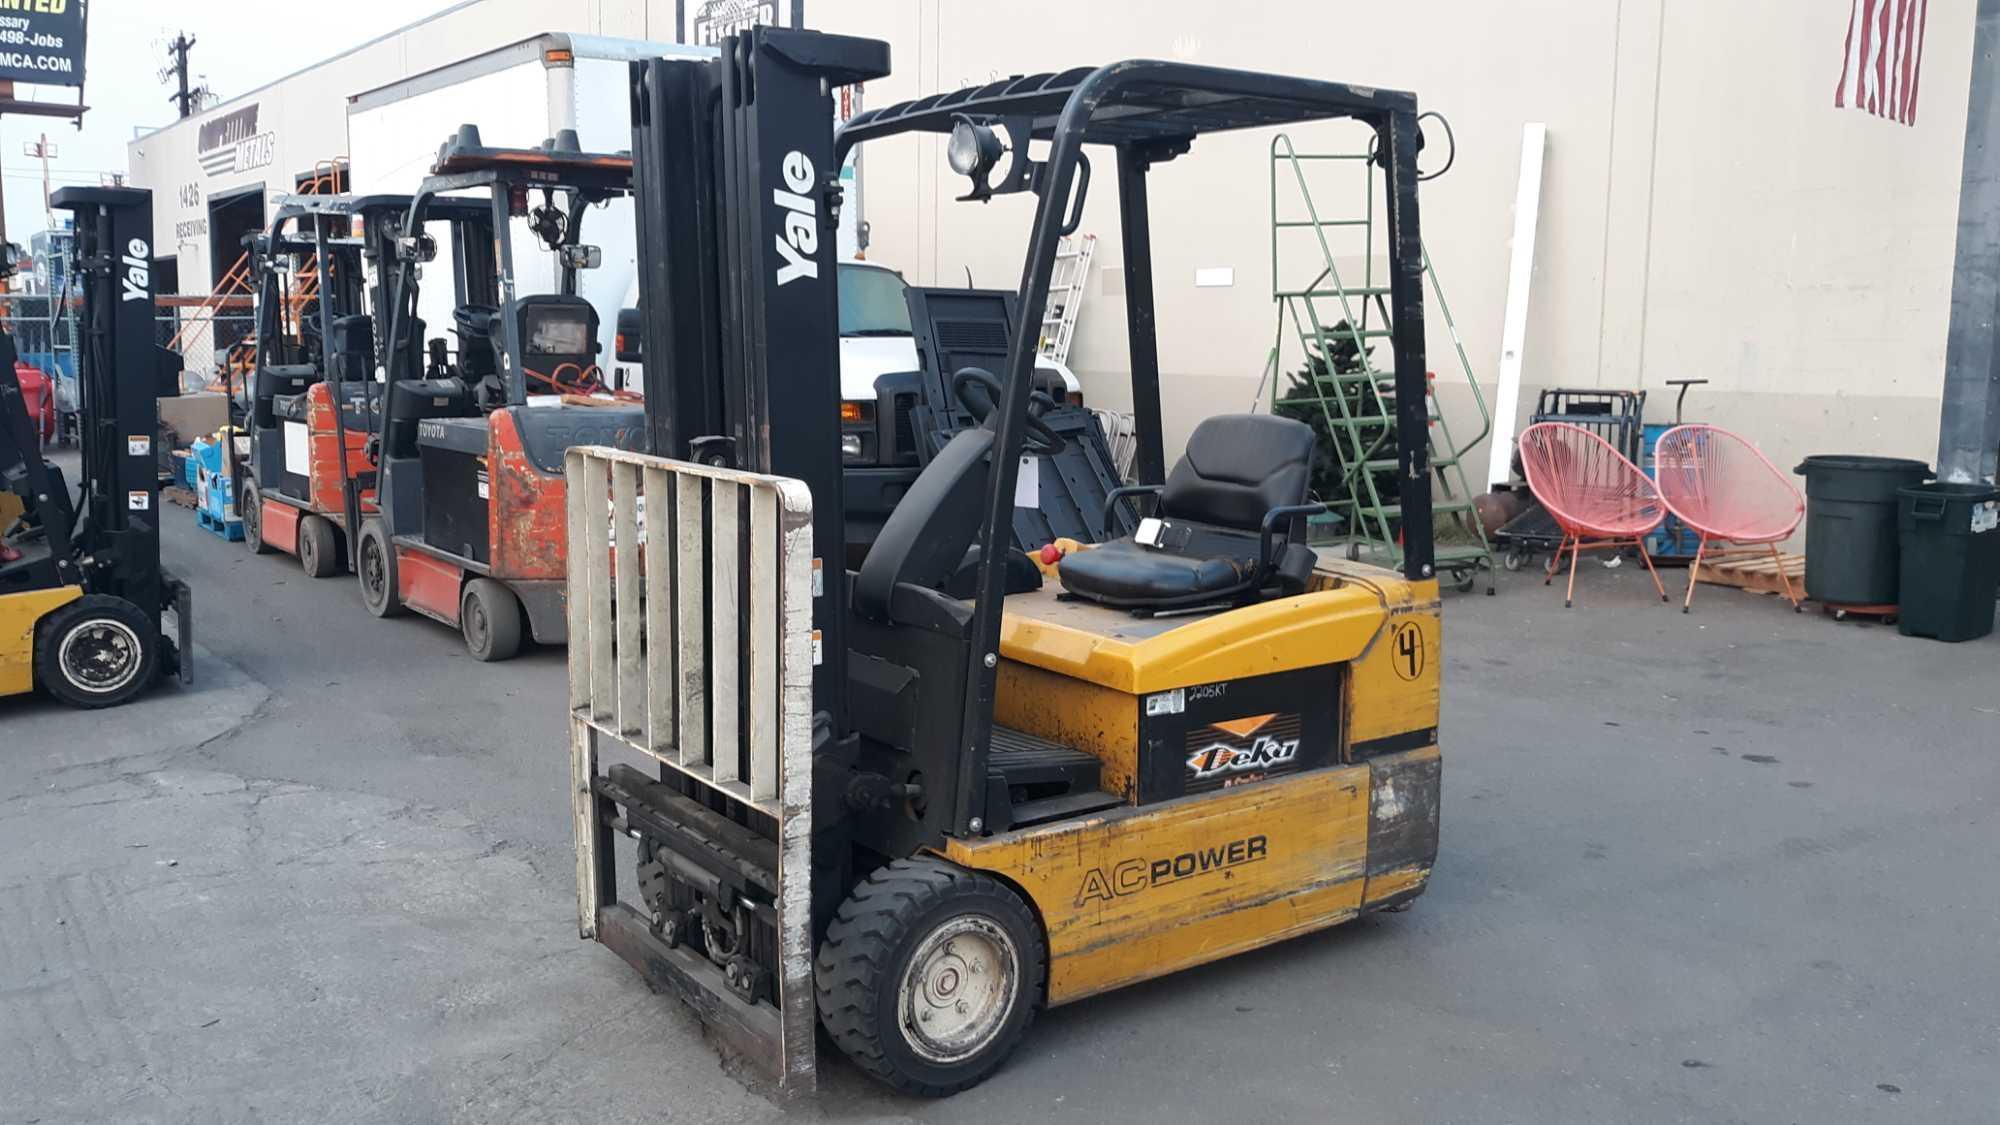 YALE 3,700lbs Capacity 36v Electric Forklift with Side Shift*MACHINE MOVES UNDER OWN BATTERY POWER*